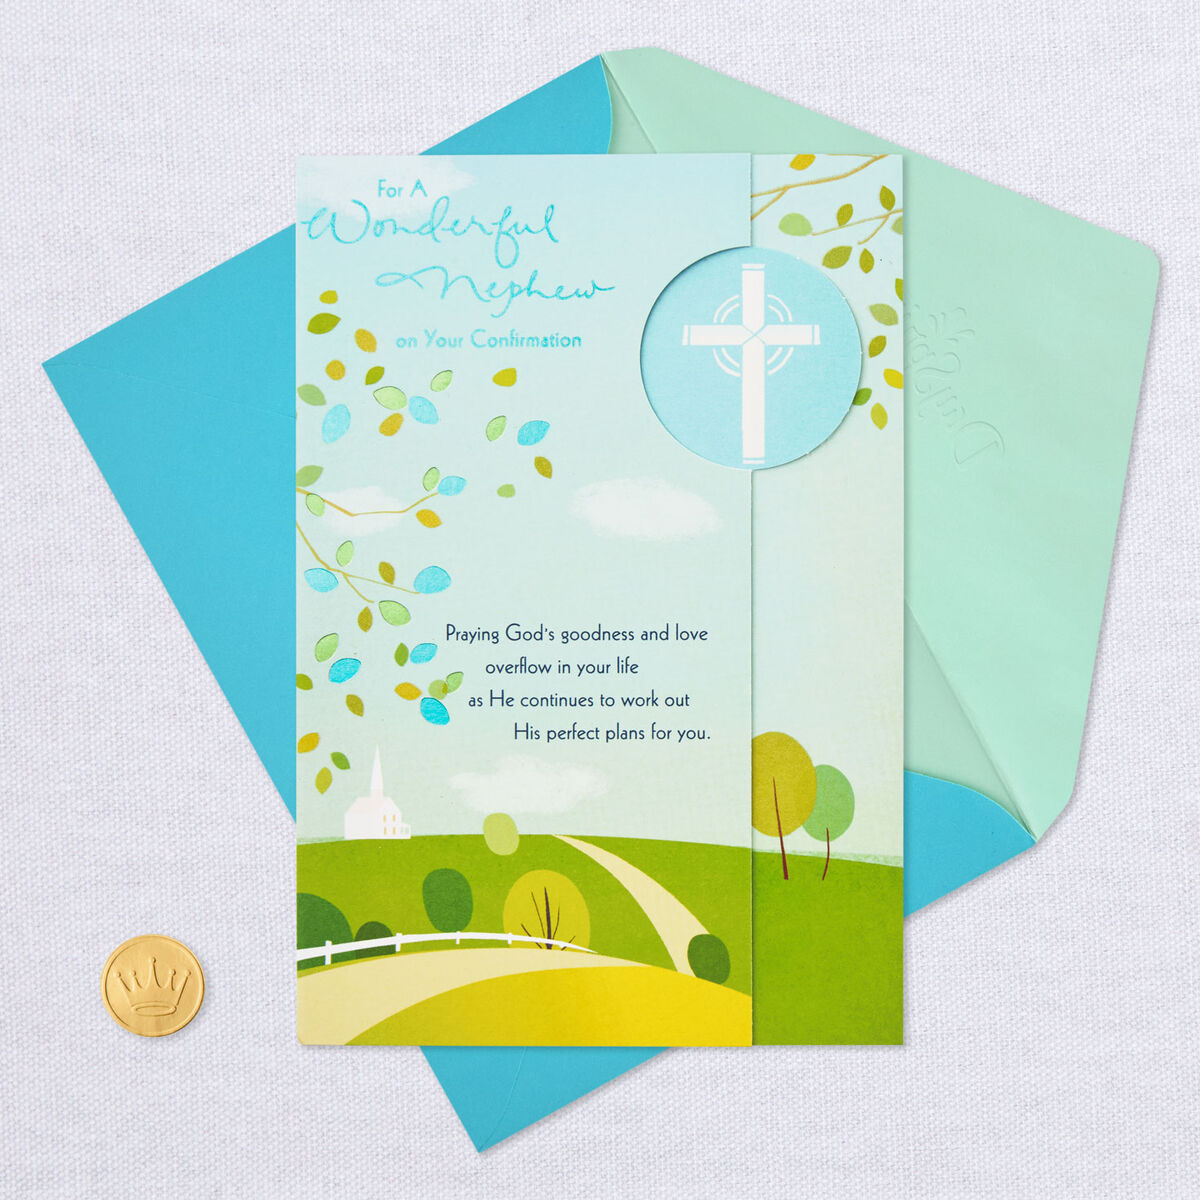 You Are a Blessing Nephew Confirmation Card - Greeting Cards - Hallmark